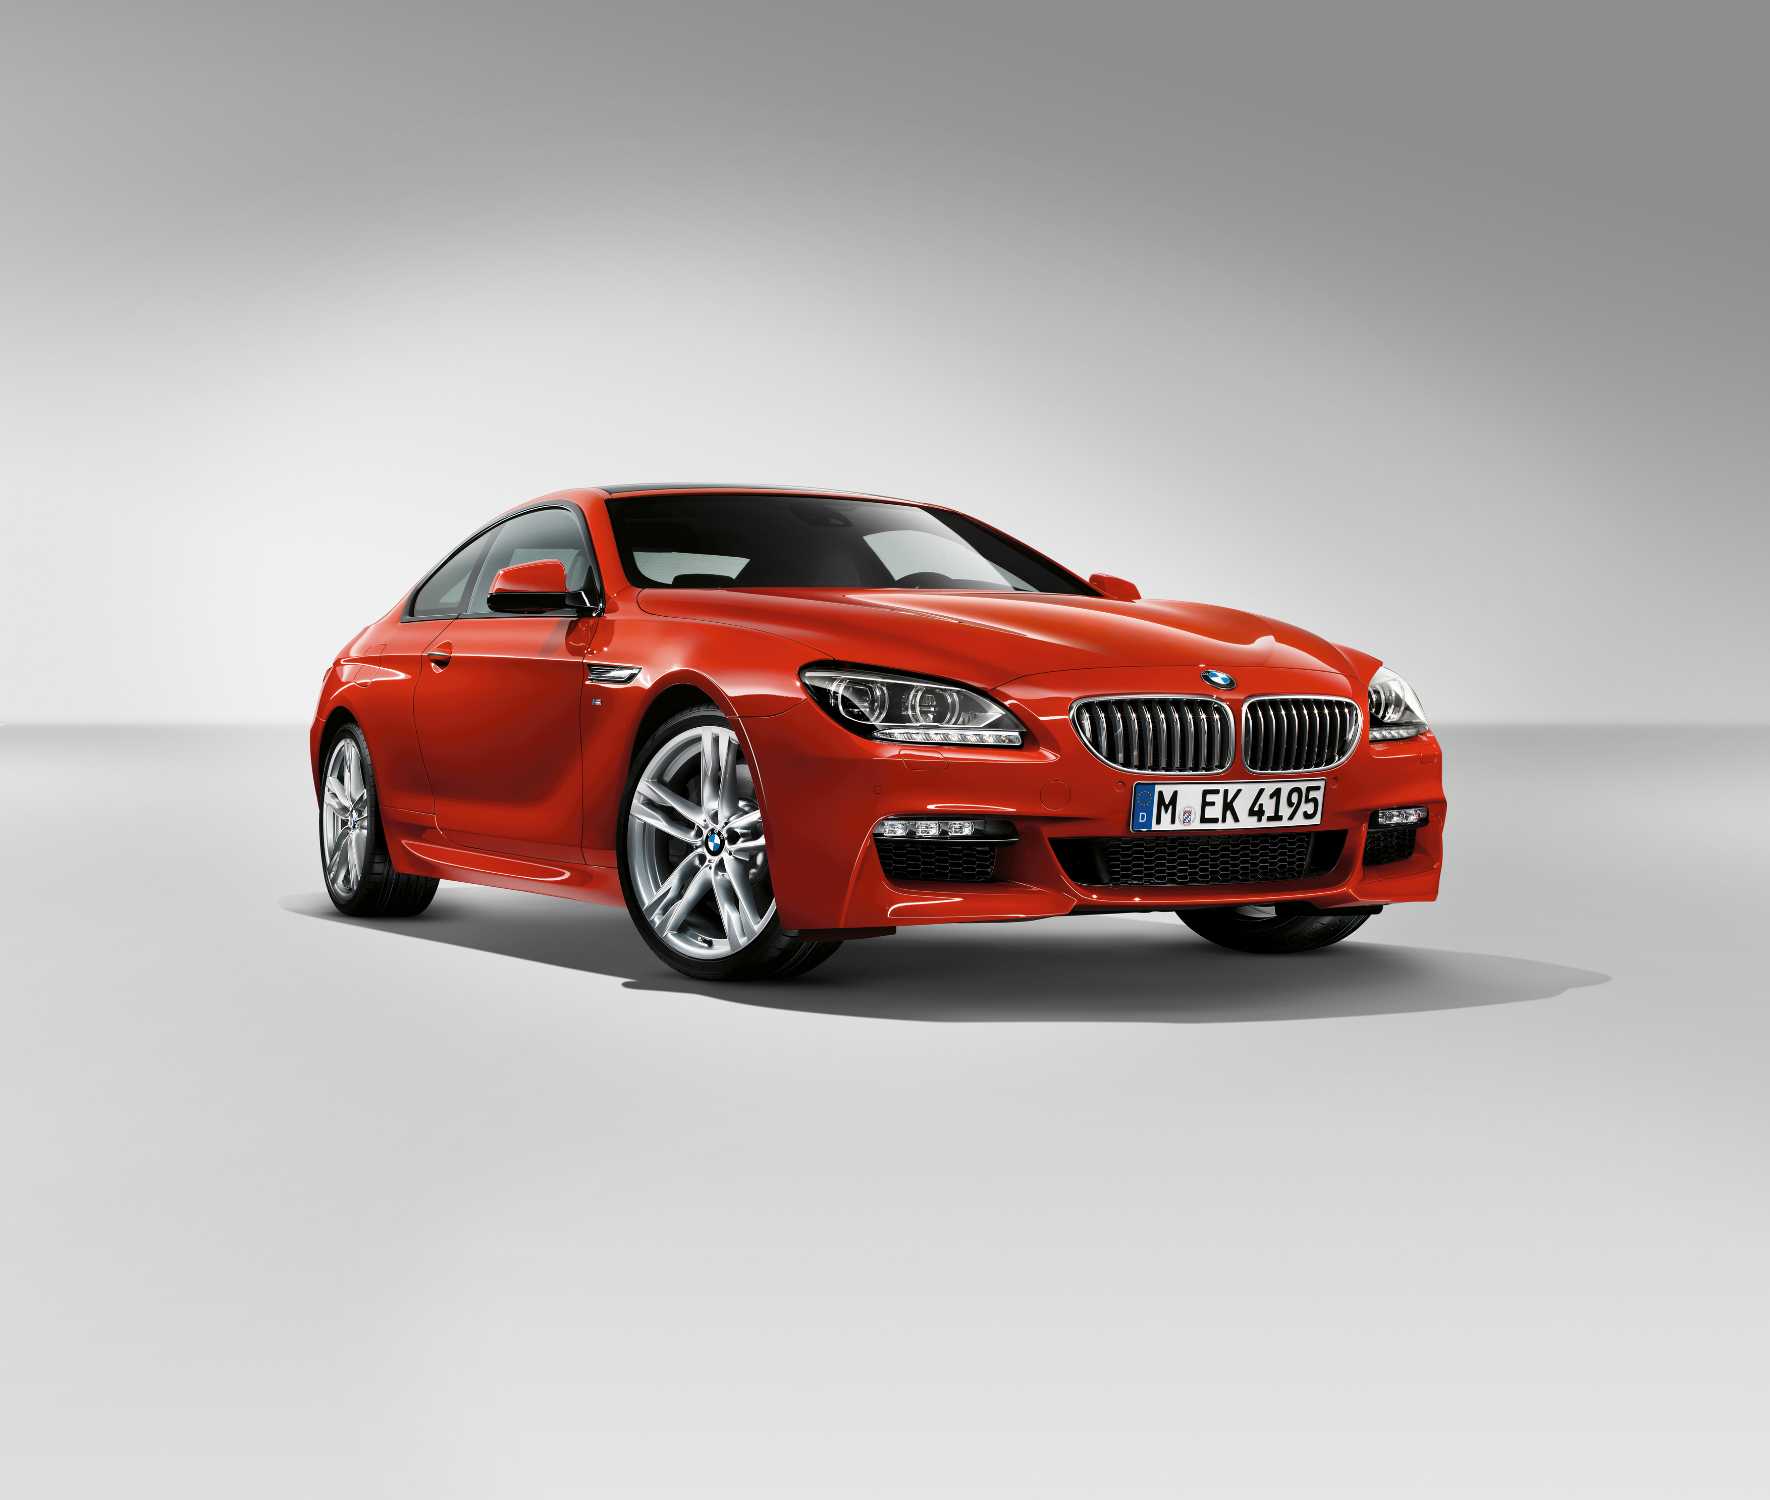 The M Sport Edition BMW 6 Series Coupe, Convertible, and Gran Coupe.